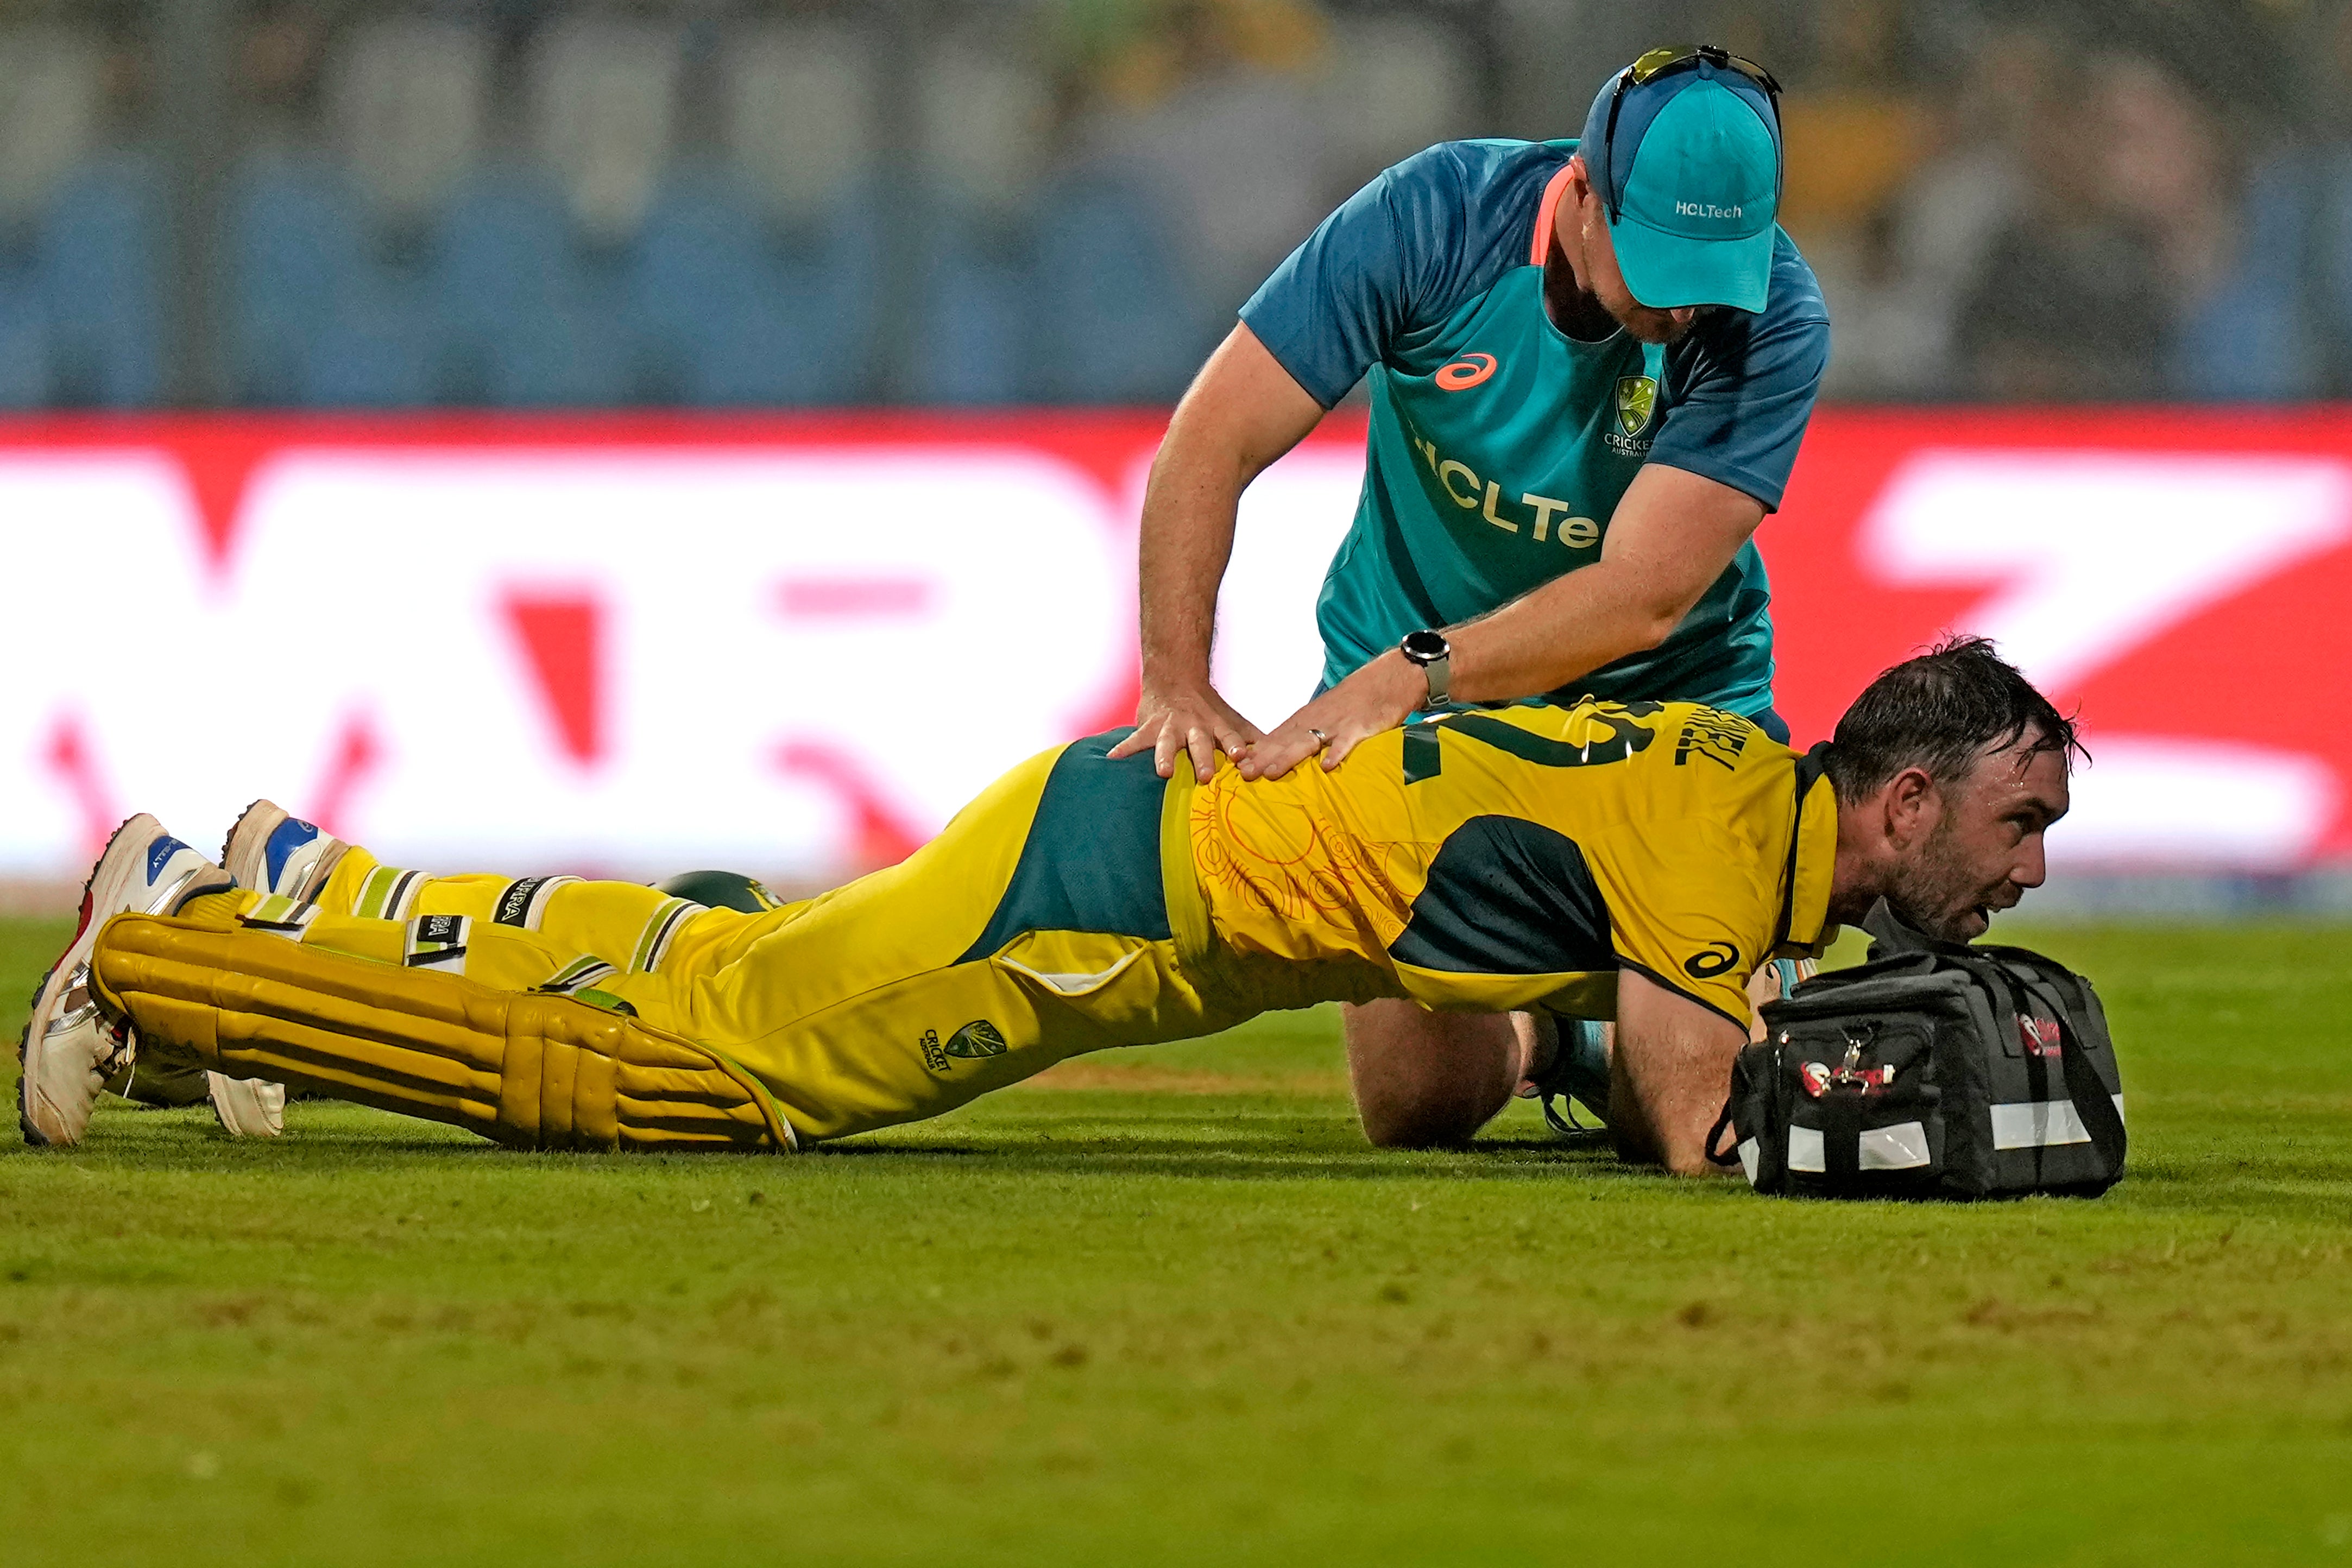 Maxwell could hardly walk at times during his innings